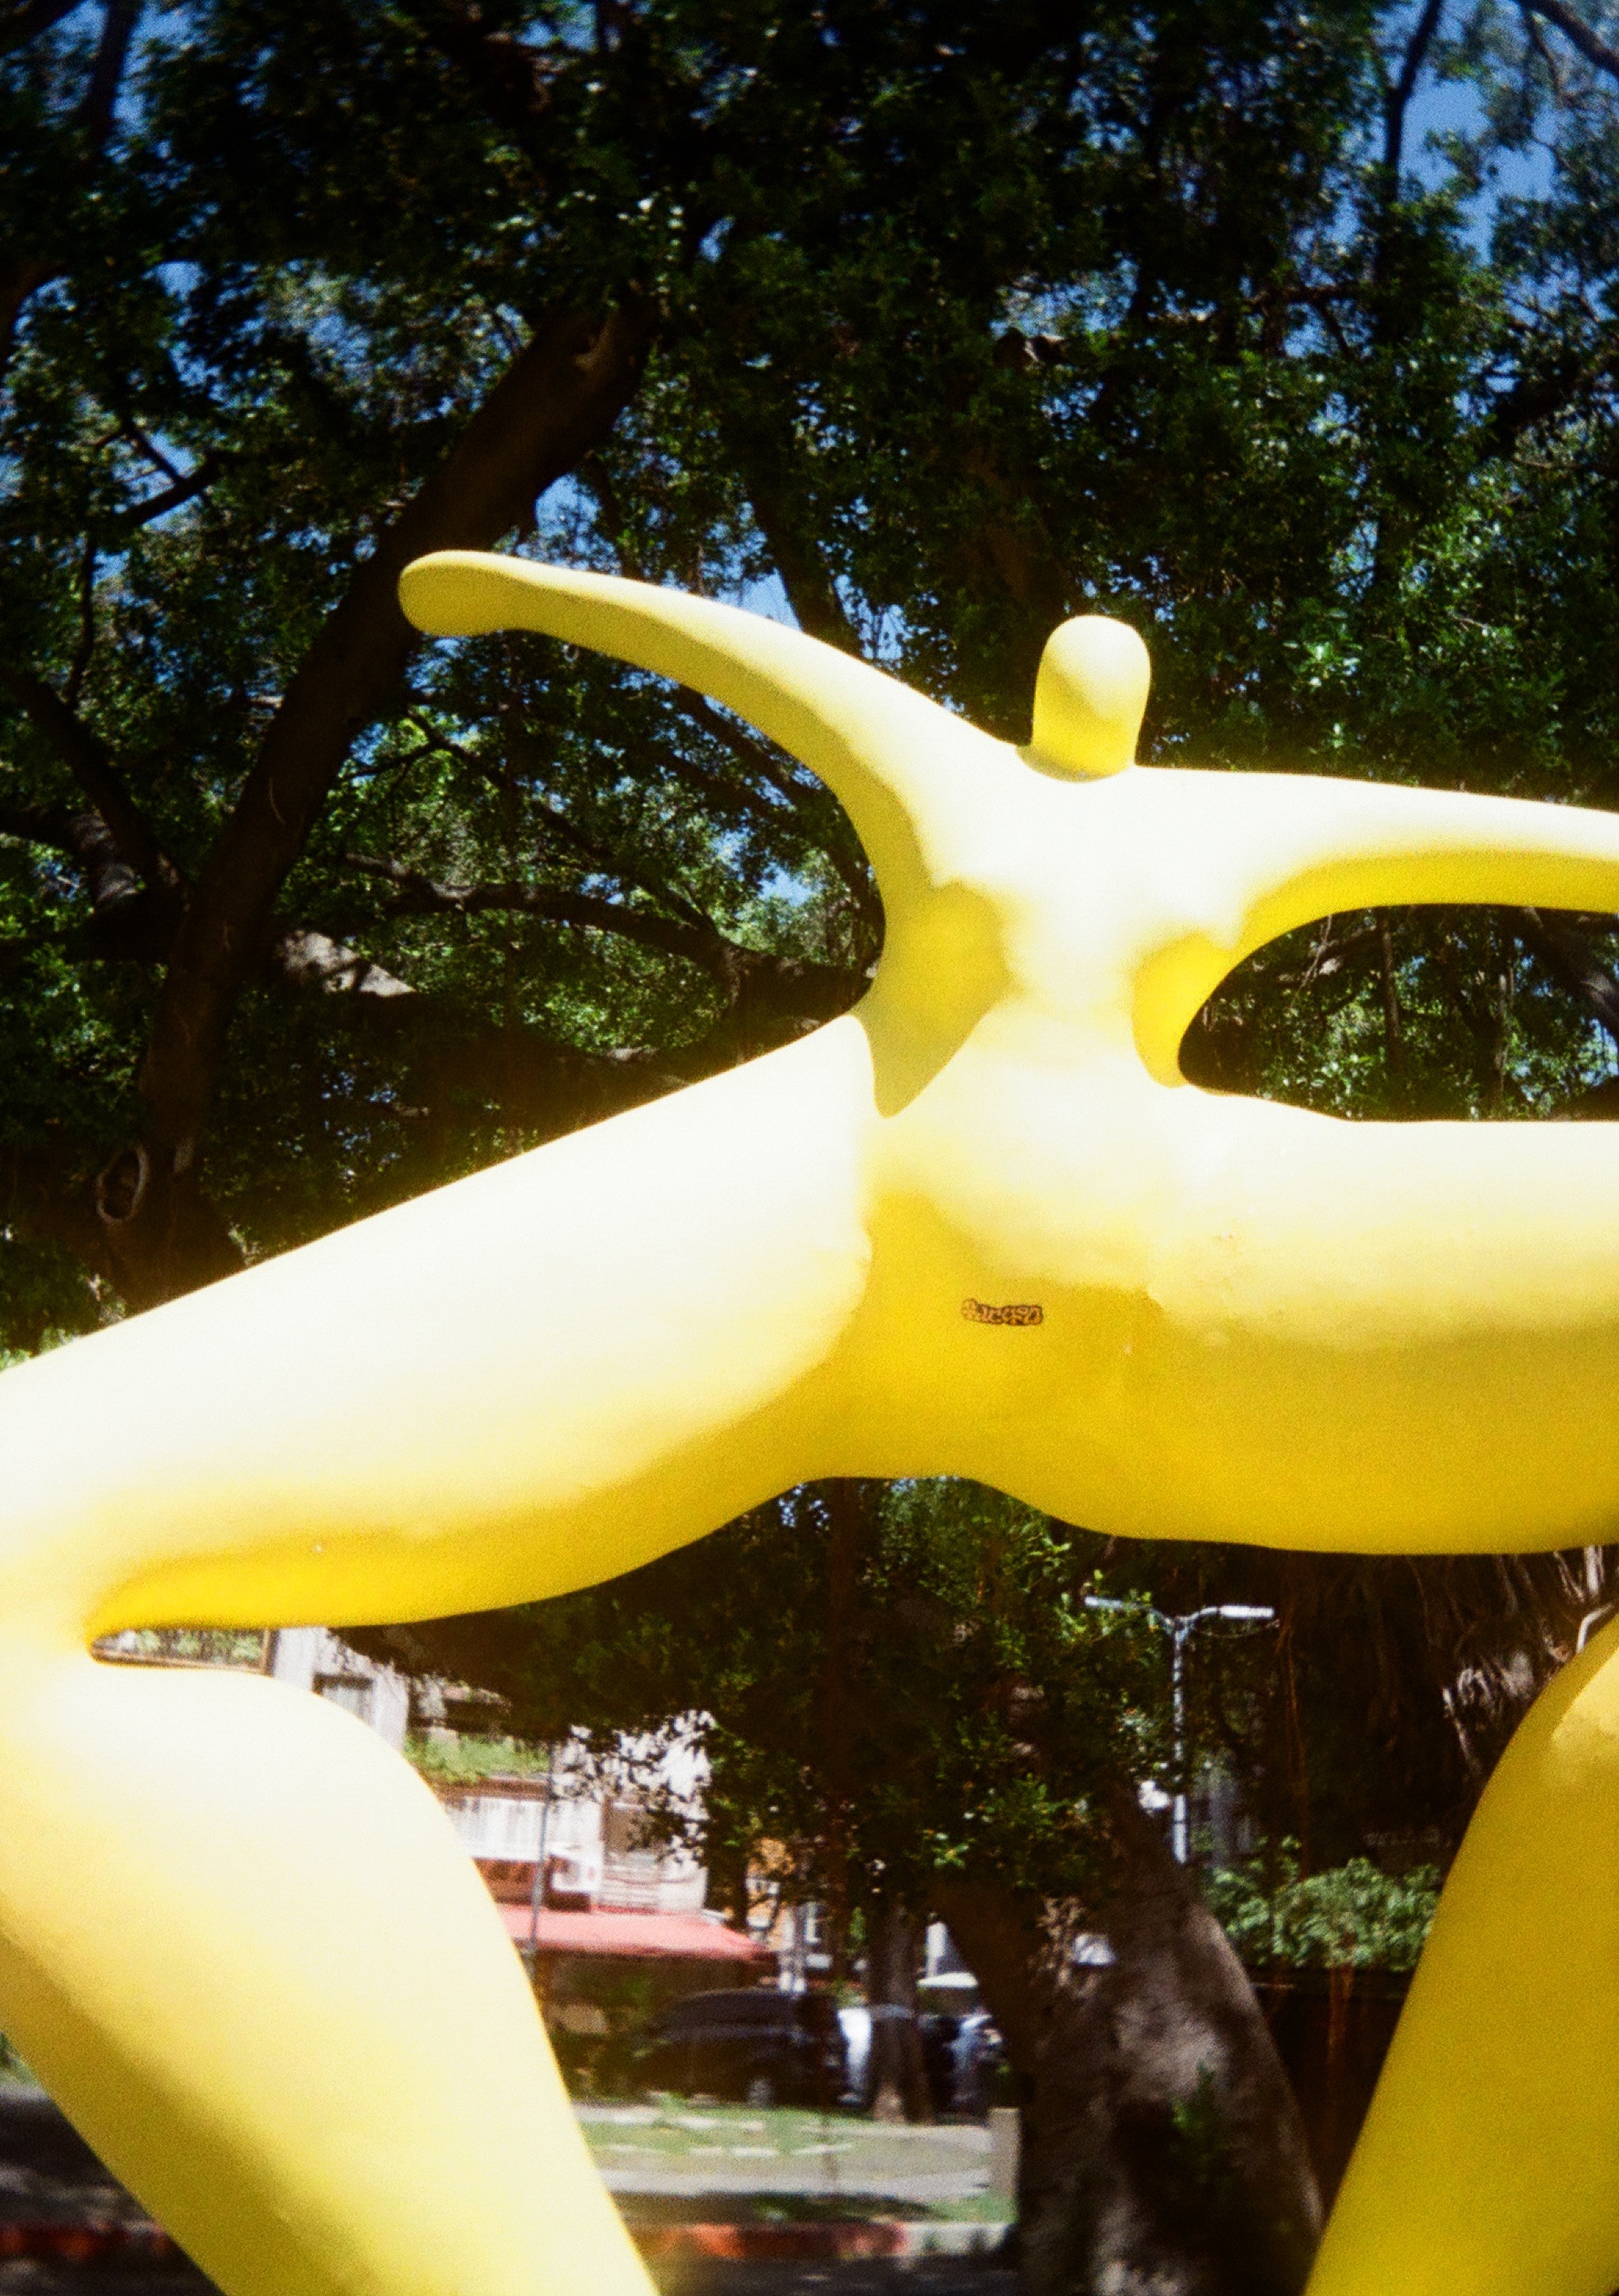 A bright yellow statue with a sticker on the crutch area